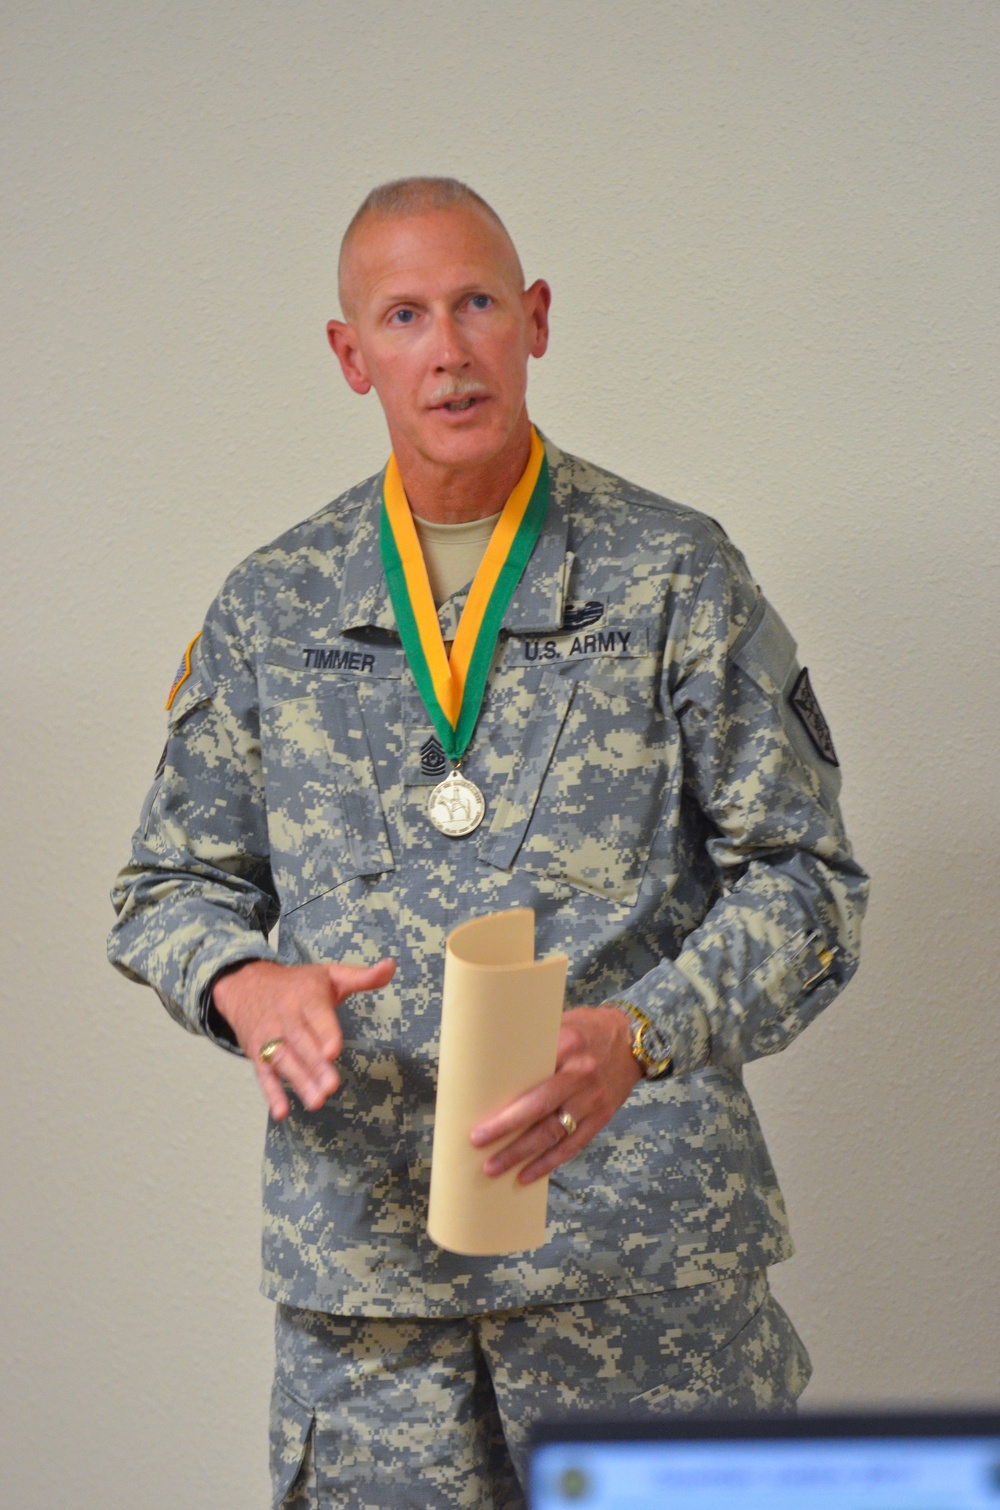 Command Sgt. Major Kurtis J. Timmer awarded the Order of the Marechaussee